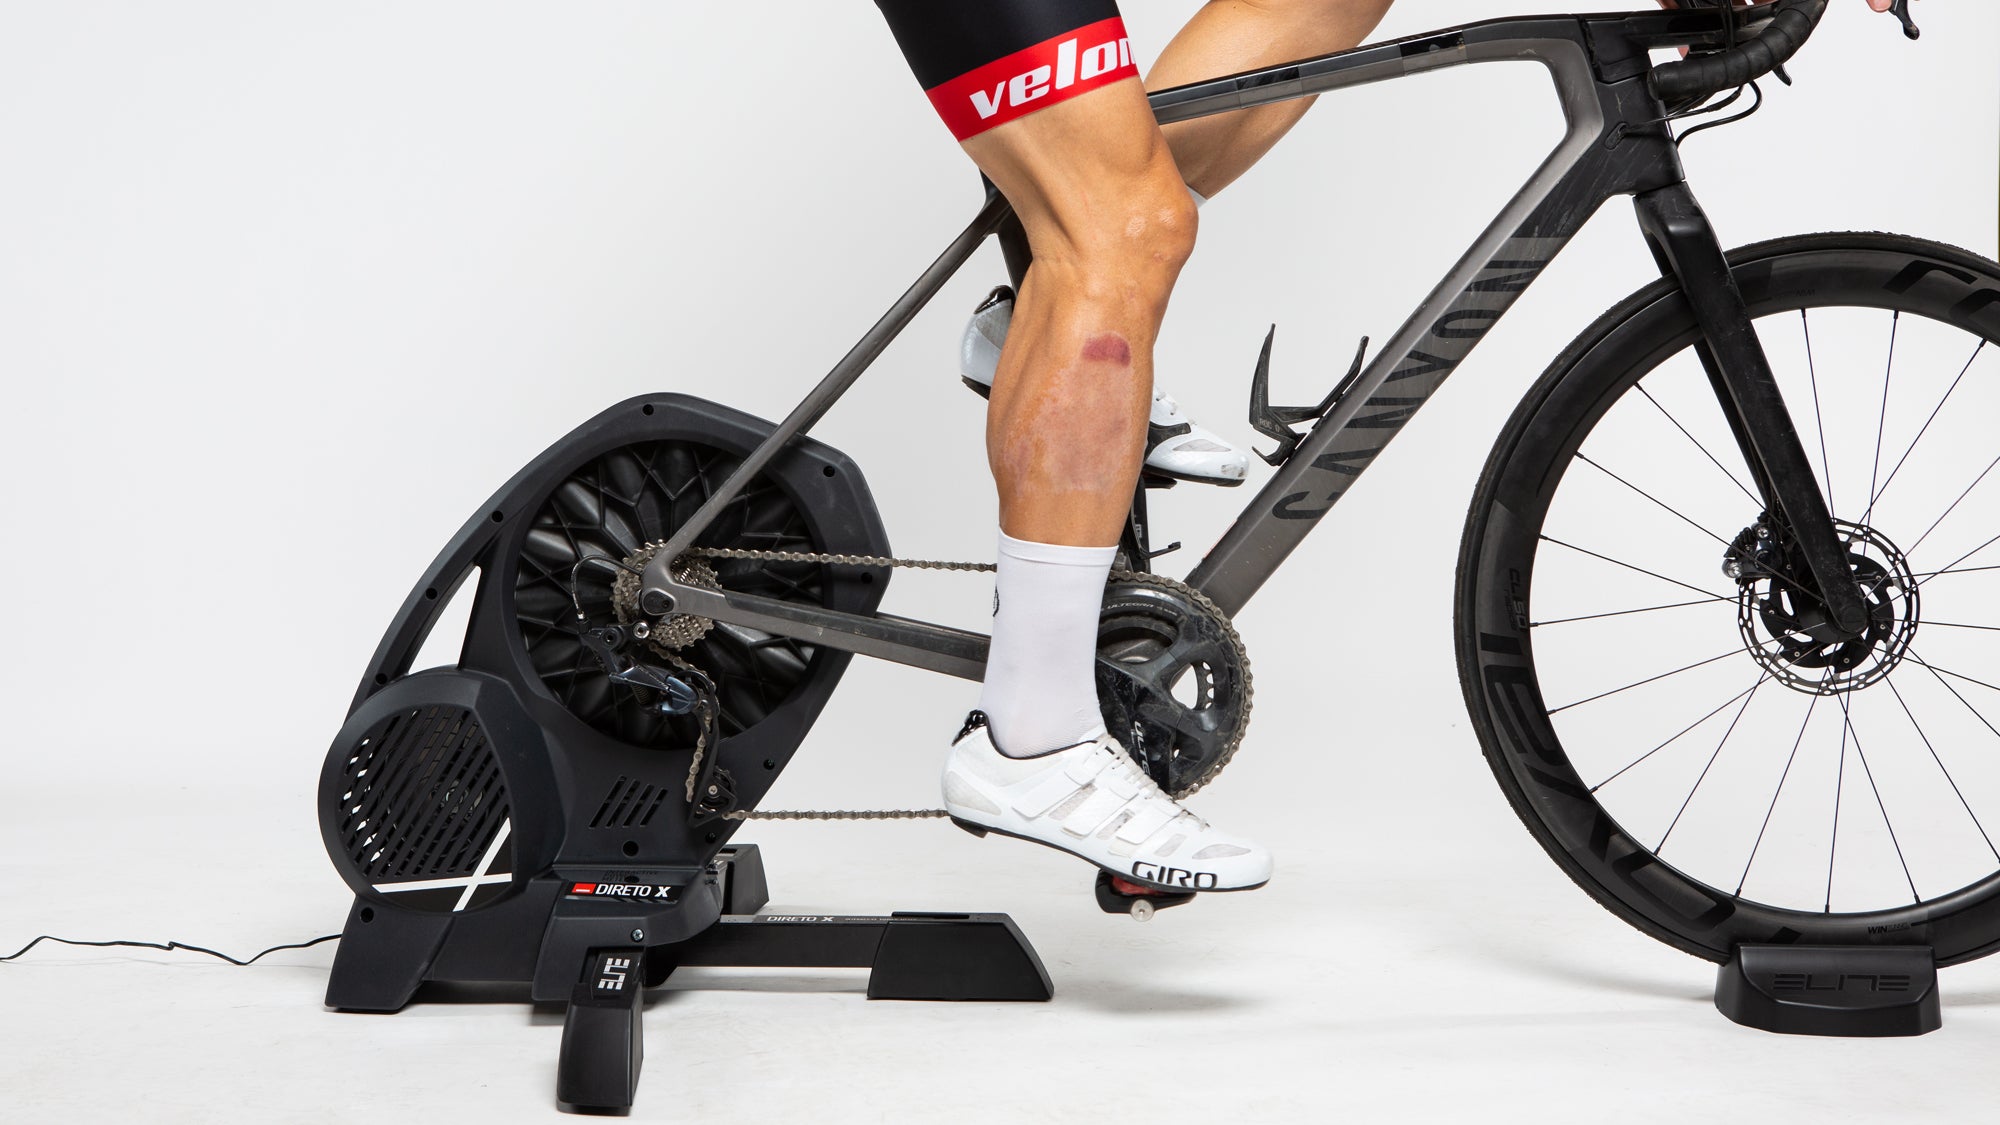 Elite Direto X Smart Trainer Review for Triathletes and Cyclists